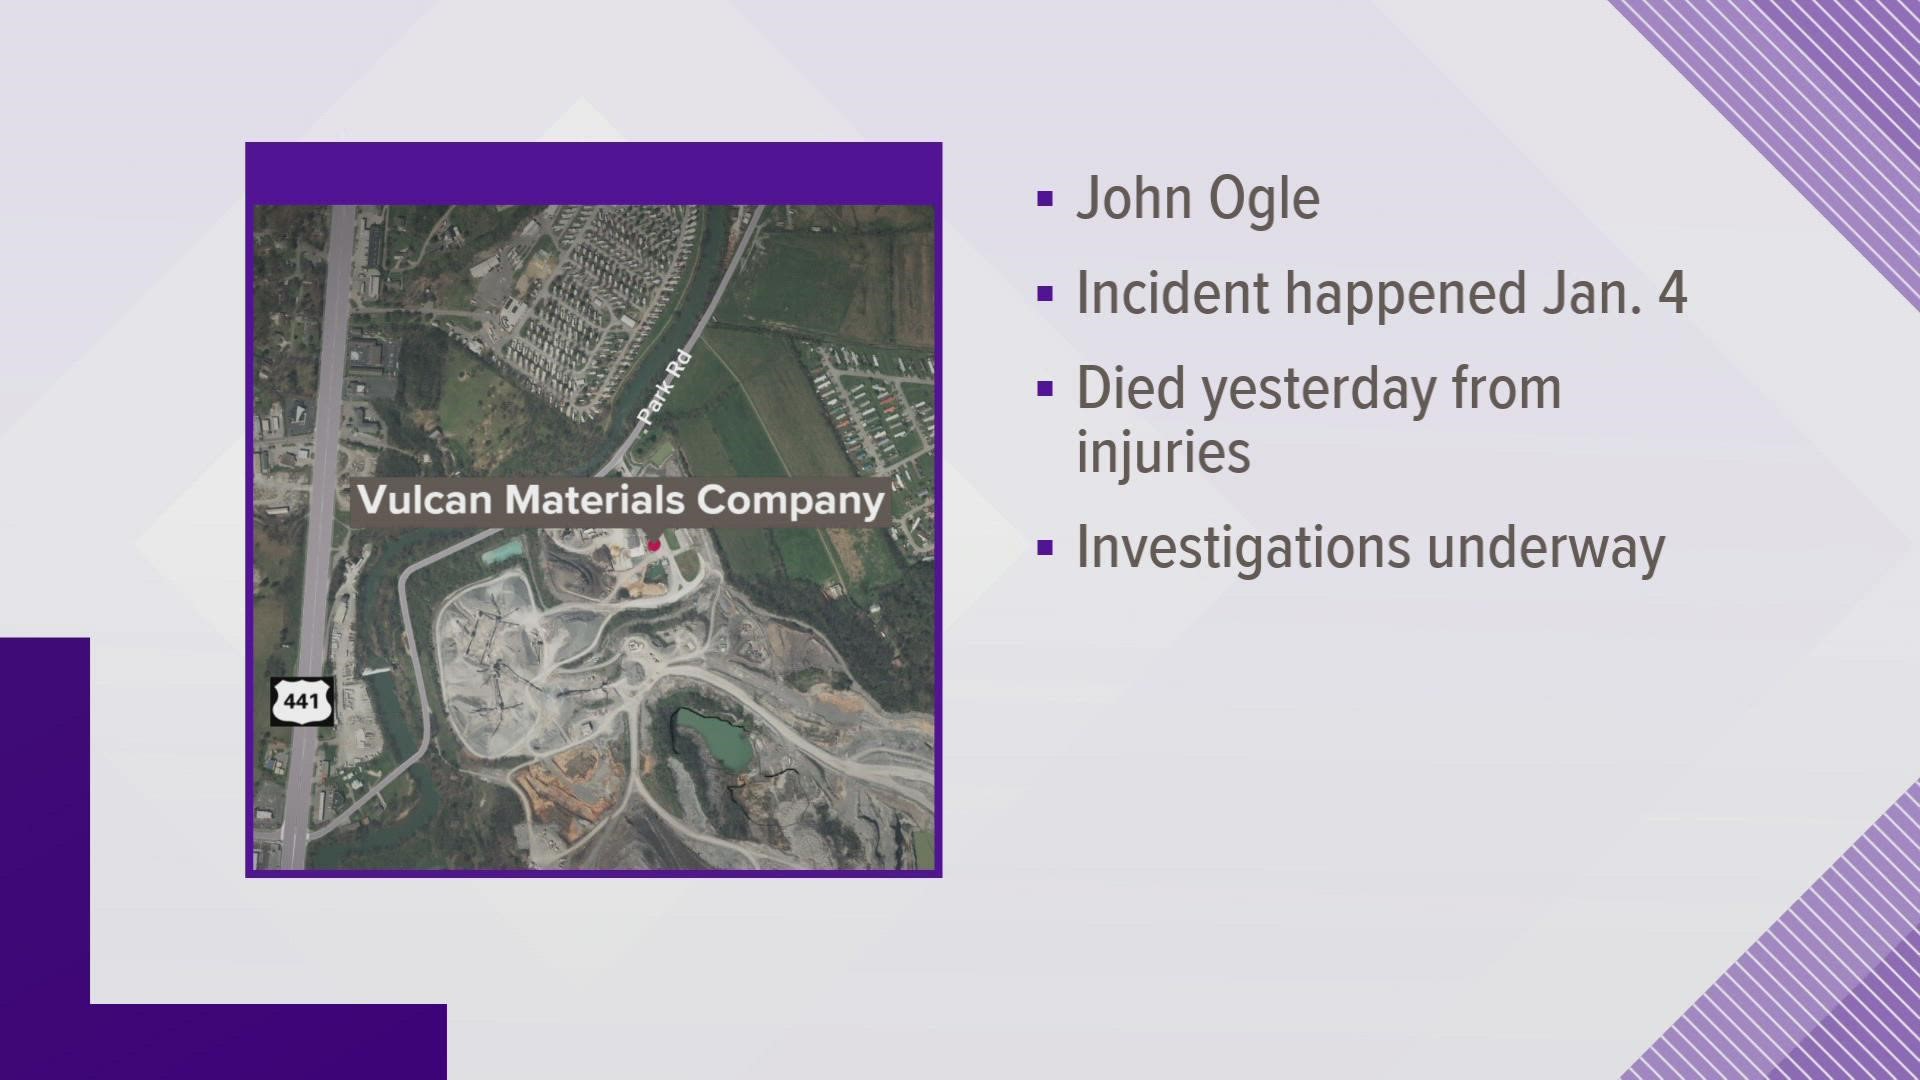 The Vulcan Materials Company said John Ogle, a quarry worker in Sevierville, died Wednesday after an incident while working on a large piece of equipment.